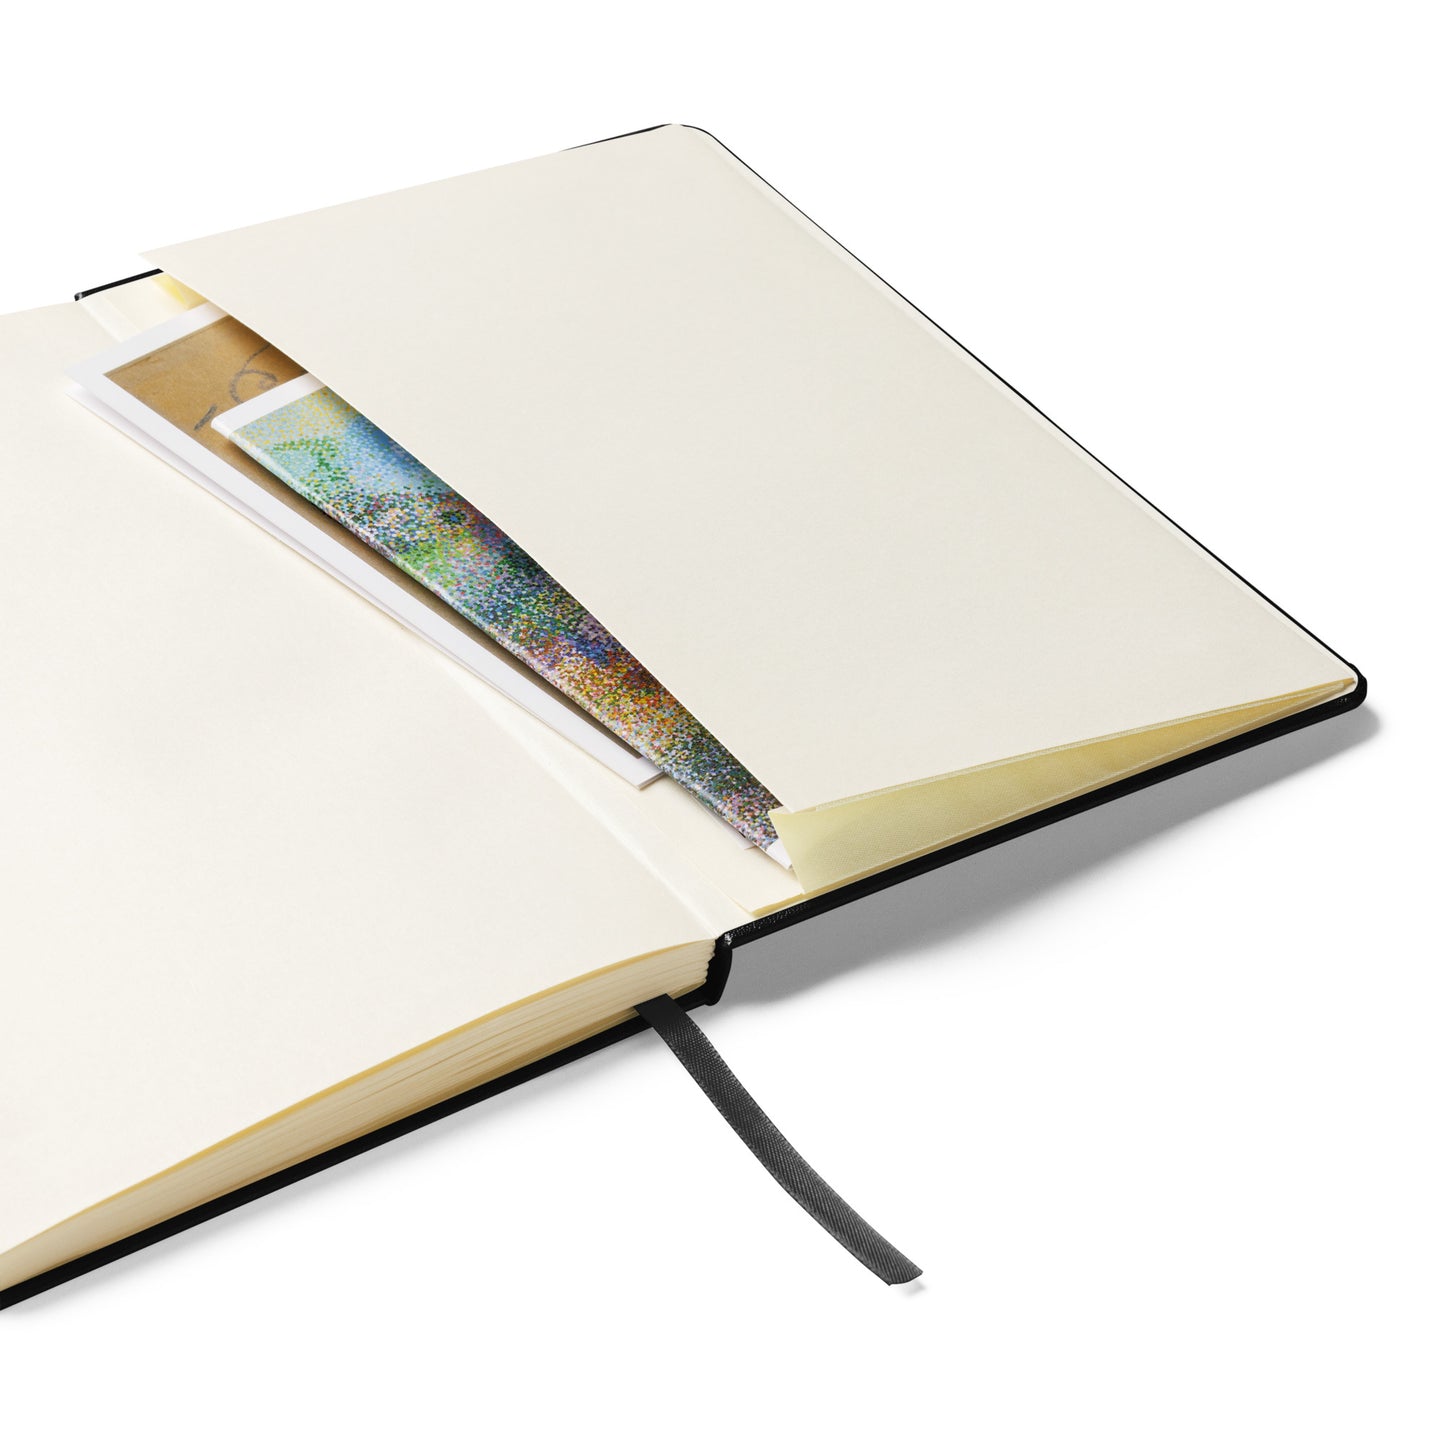 “Pop free from your bubble” - Hardcover bound notebook